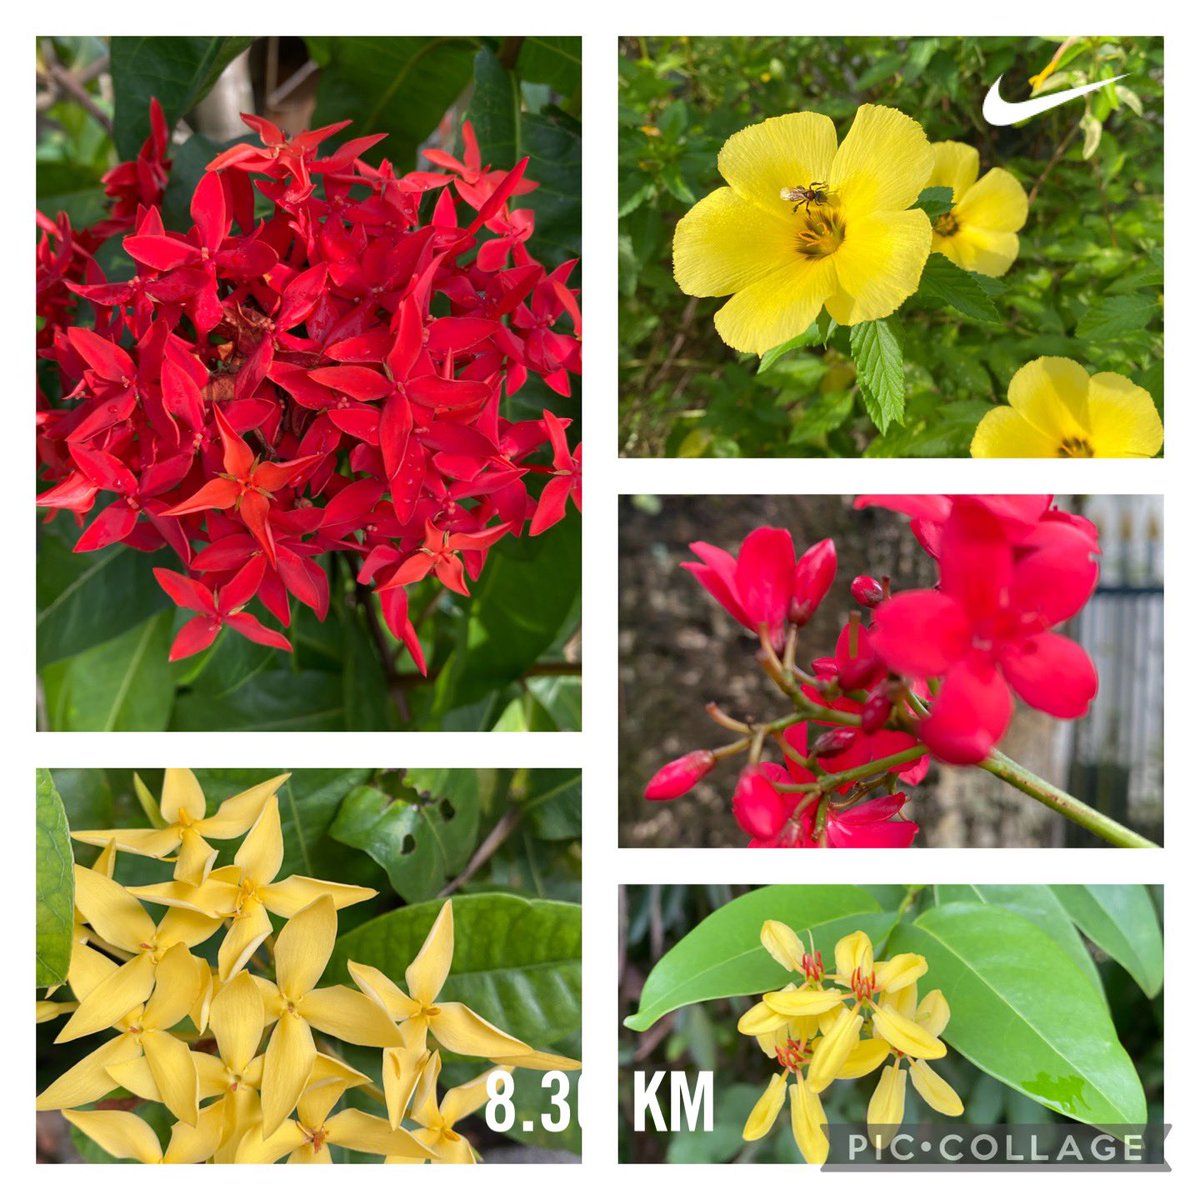 Spotted on my jog today..Red&Yellow ❤️💛
How time flies. I was reminded by friends that we have a race on 14th May @MWM 2023 which means I have about 13 days to get fit and burn the Raya fat etc. Oh well..it is what it is 😃
#liveUsana #startsomethingnow